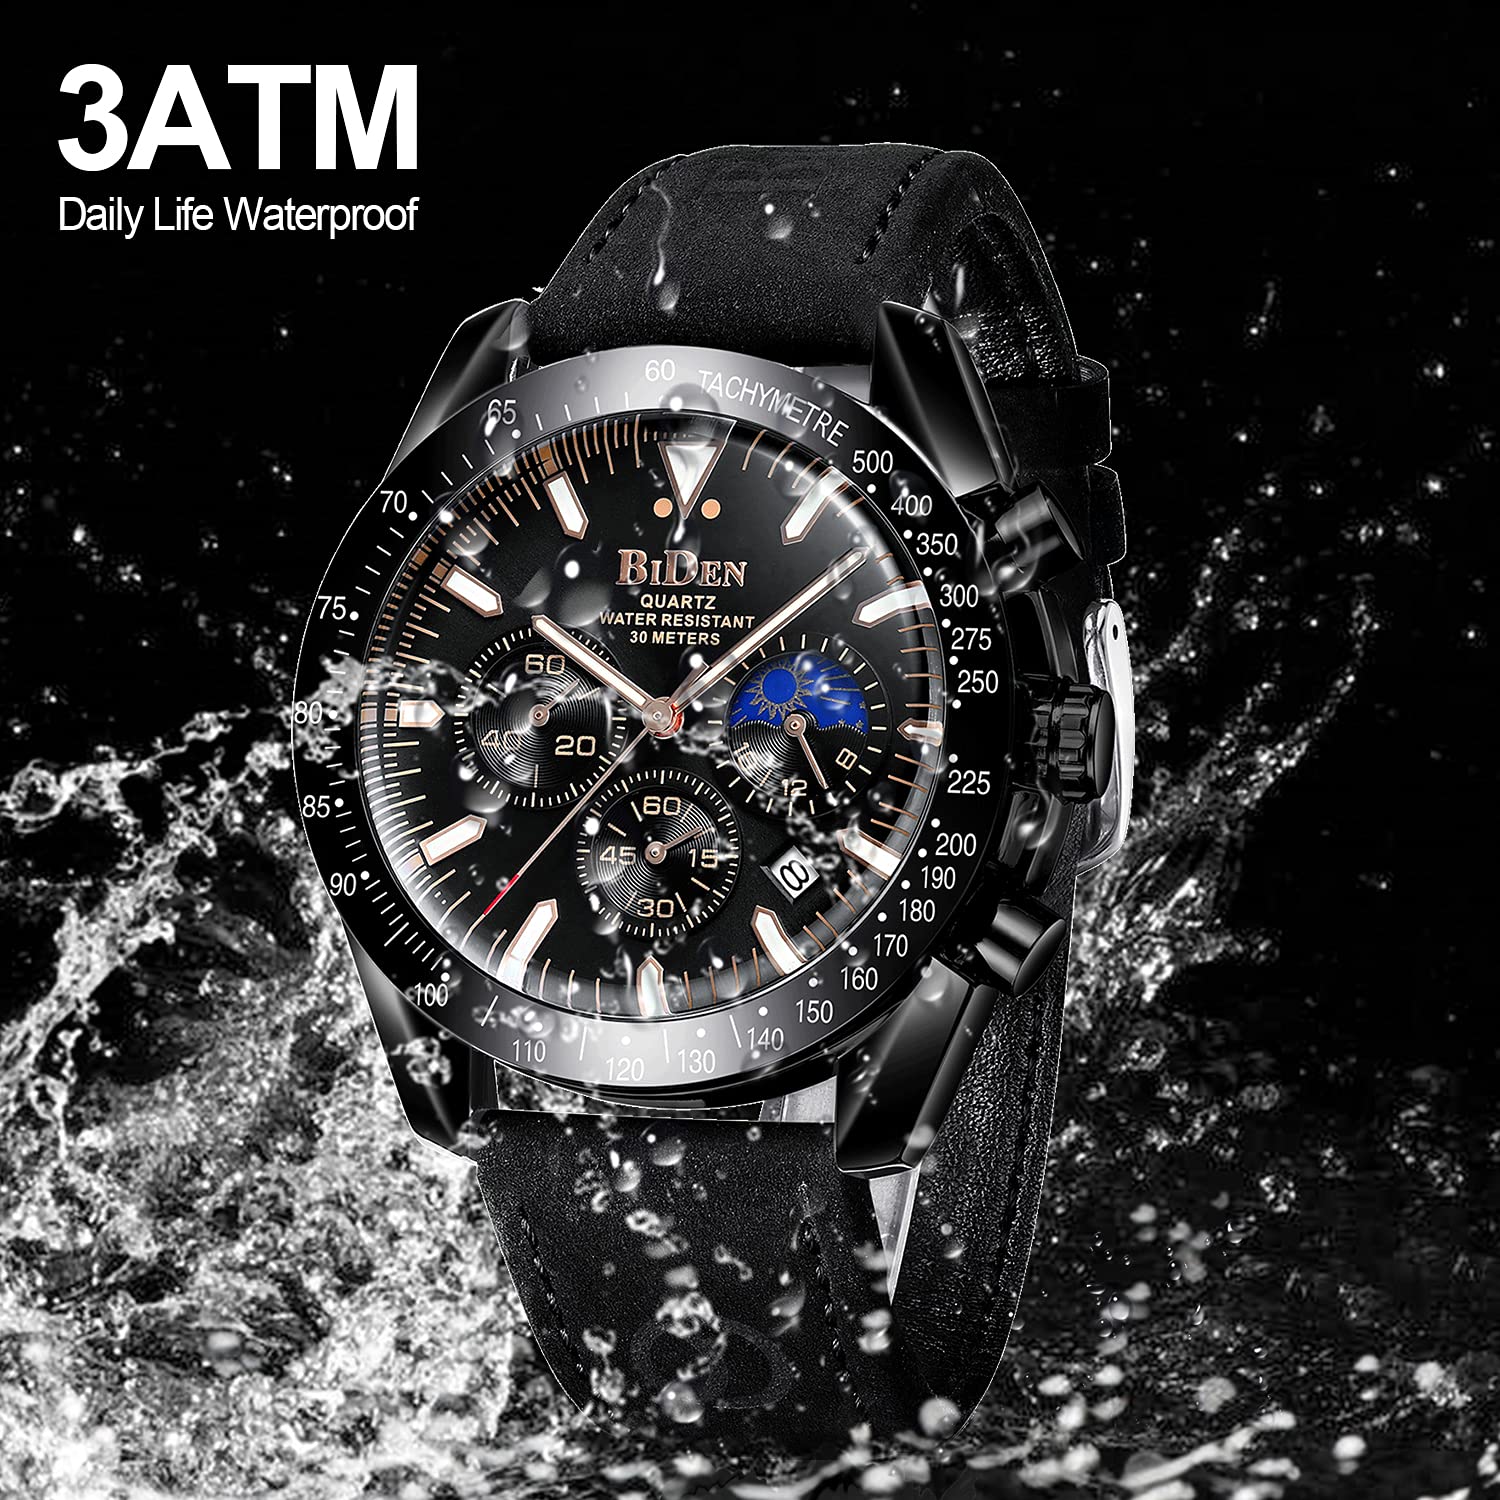 Mens Watches Chronograph Analog Quartz Watch Fashion Business Casual Watch Cool Watches Stainless Steel Waterproof Men's Wrist Watches Date Luminous Moon Phase Wrist Watch for Men